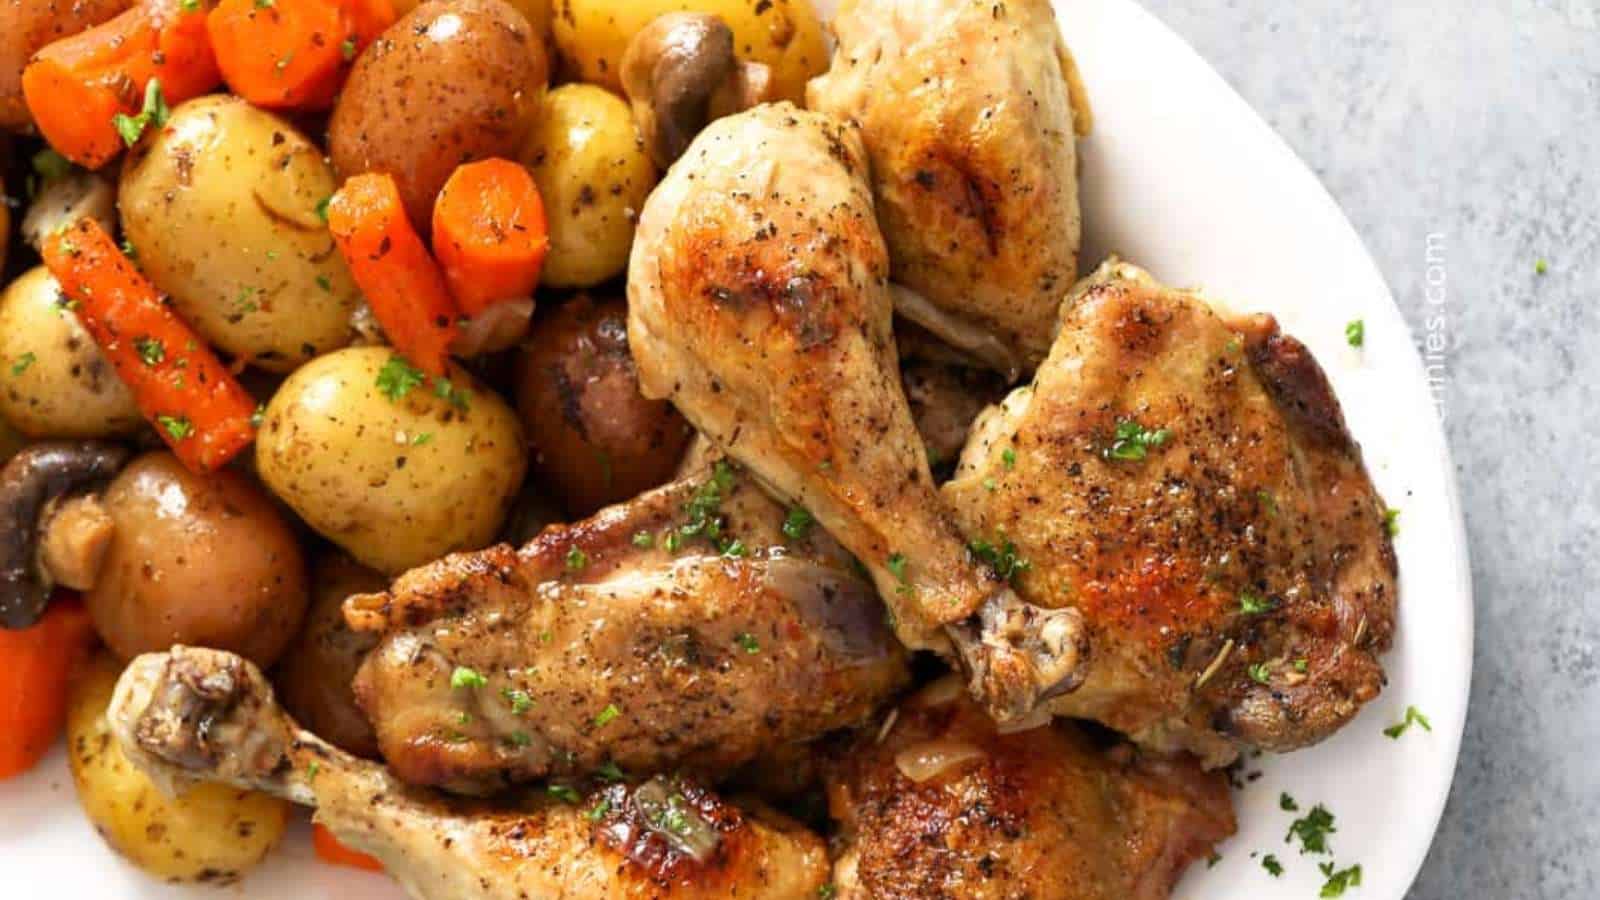 Roasted chicken with carrots and potatoes on a white plate.